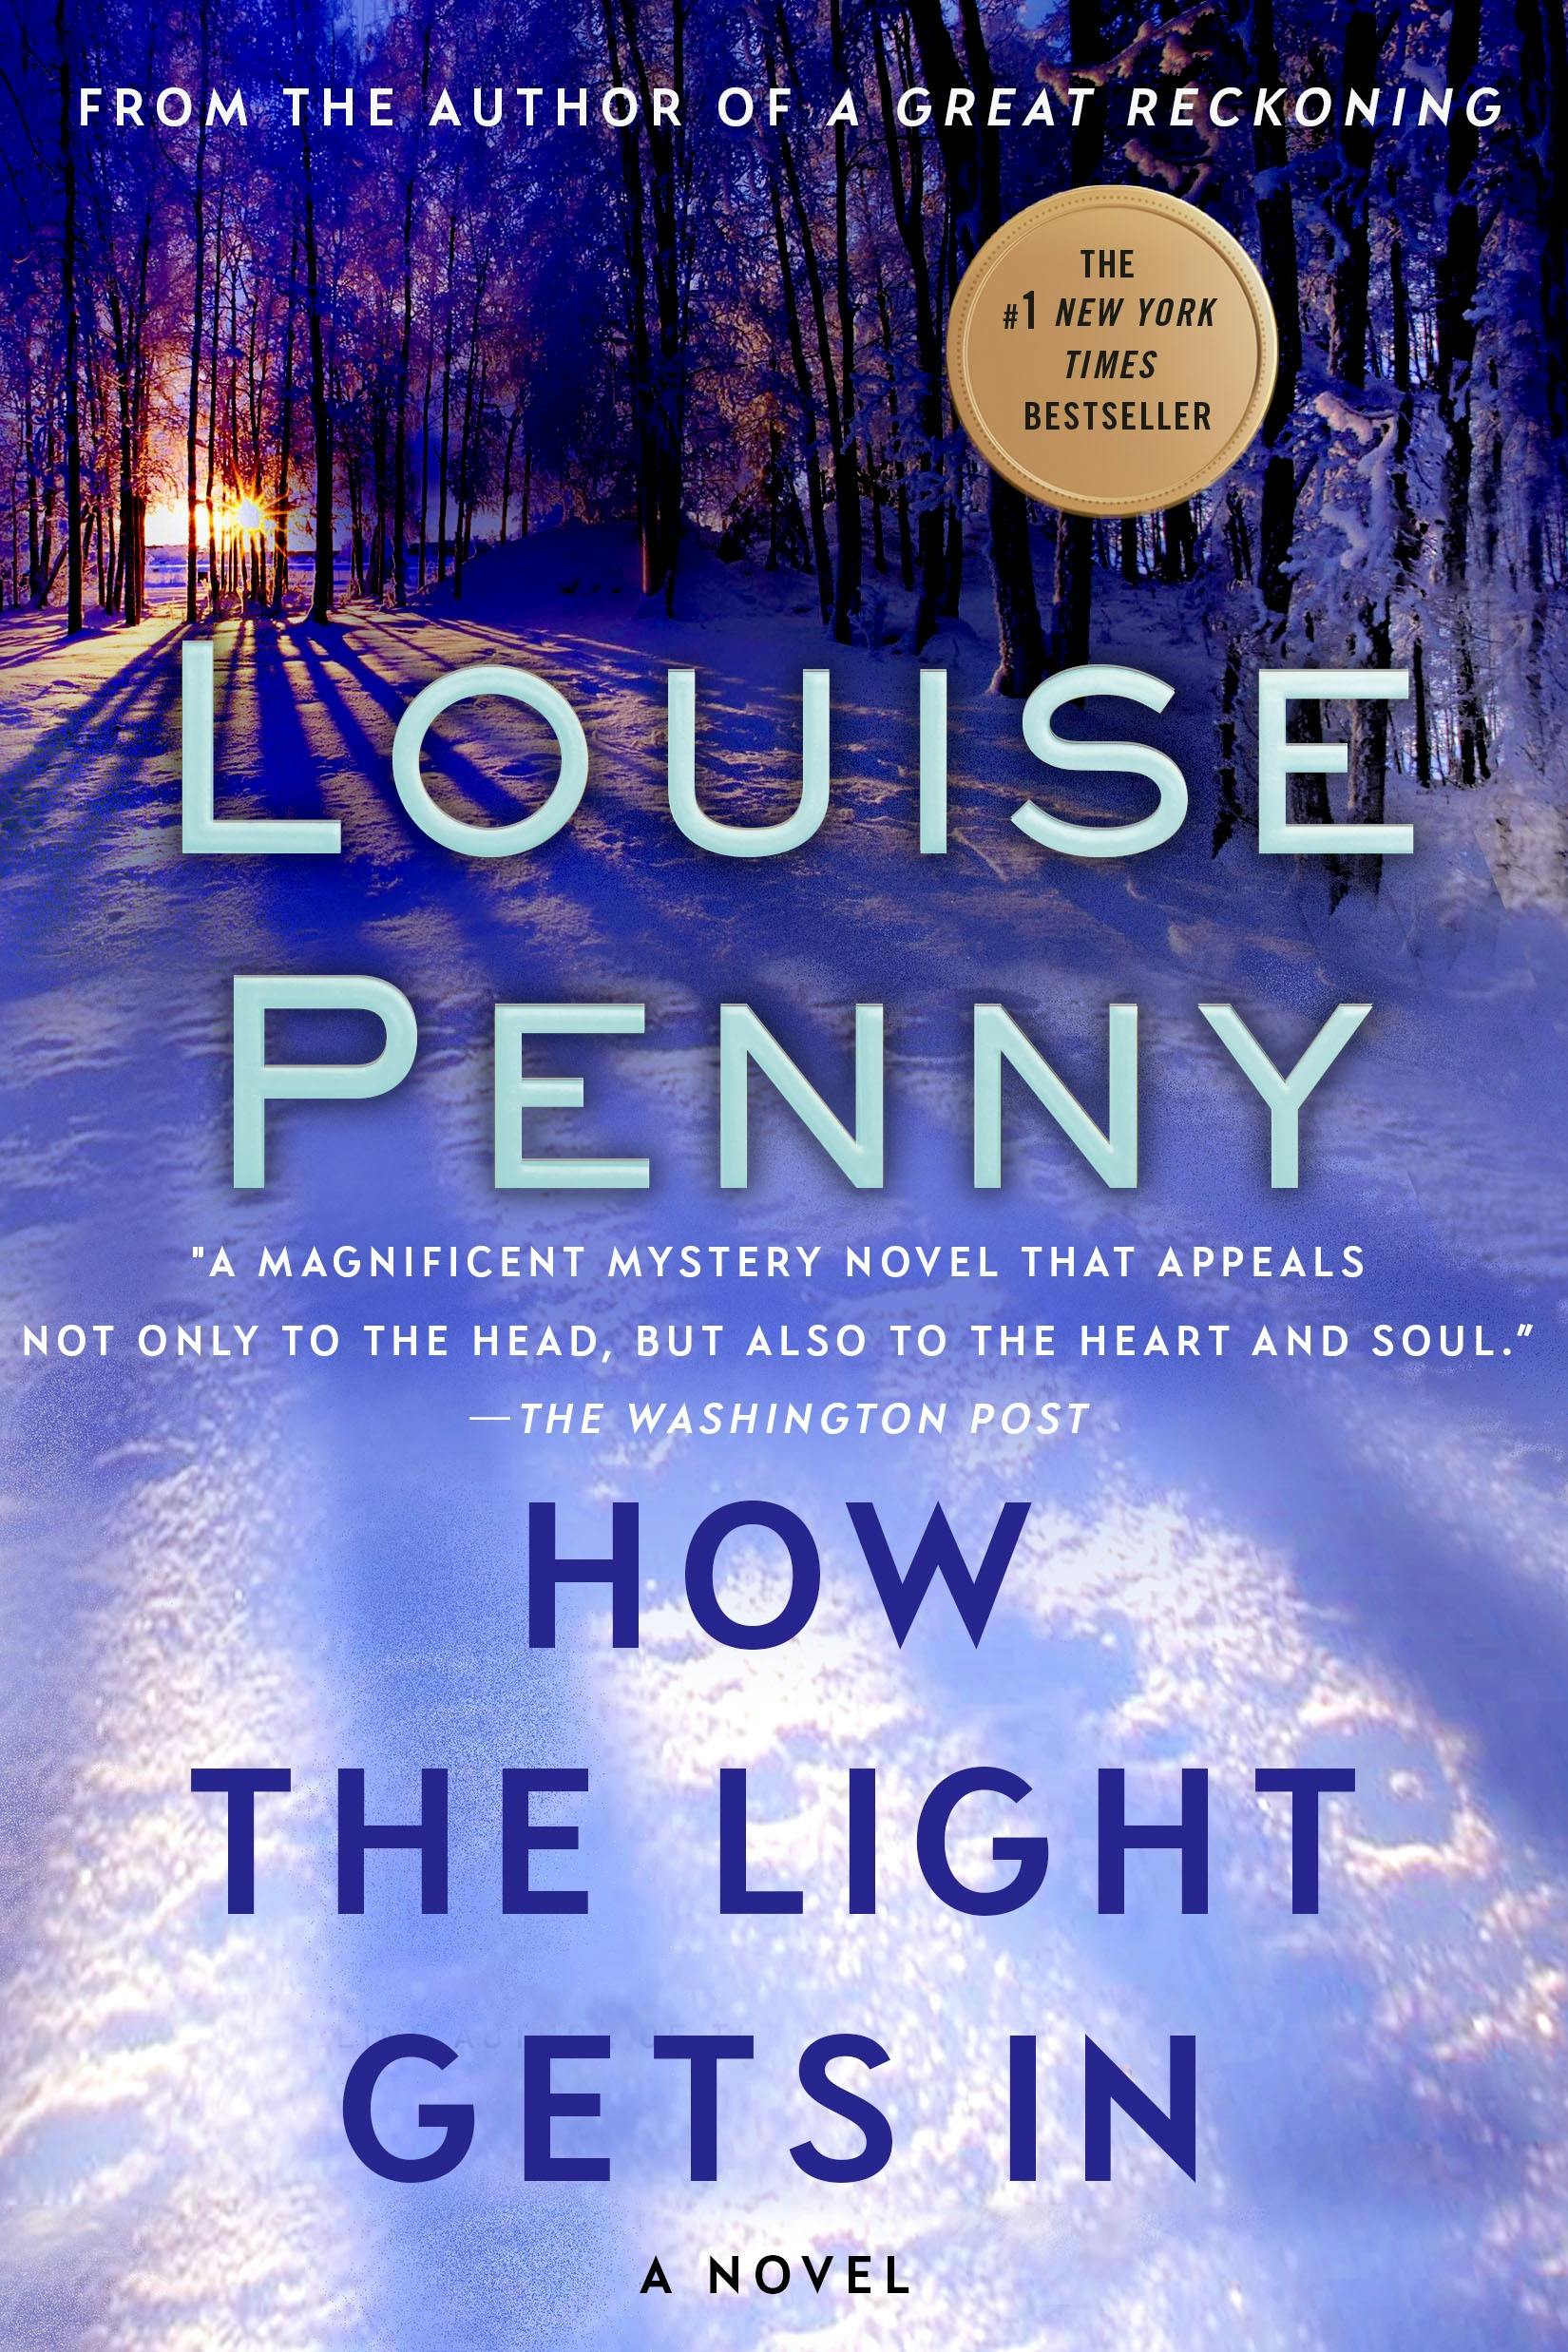 Louise Penny Boxed Set (1-3): Still Life, A Fatal Grace, The Cruelest Month  (Chief Inspector Gamache Novel): Penny, Louise: 9781250059680: :  Books